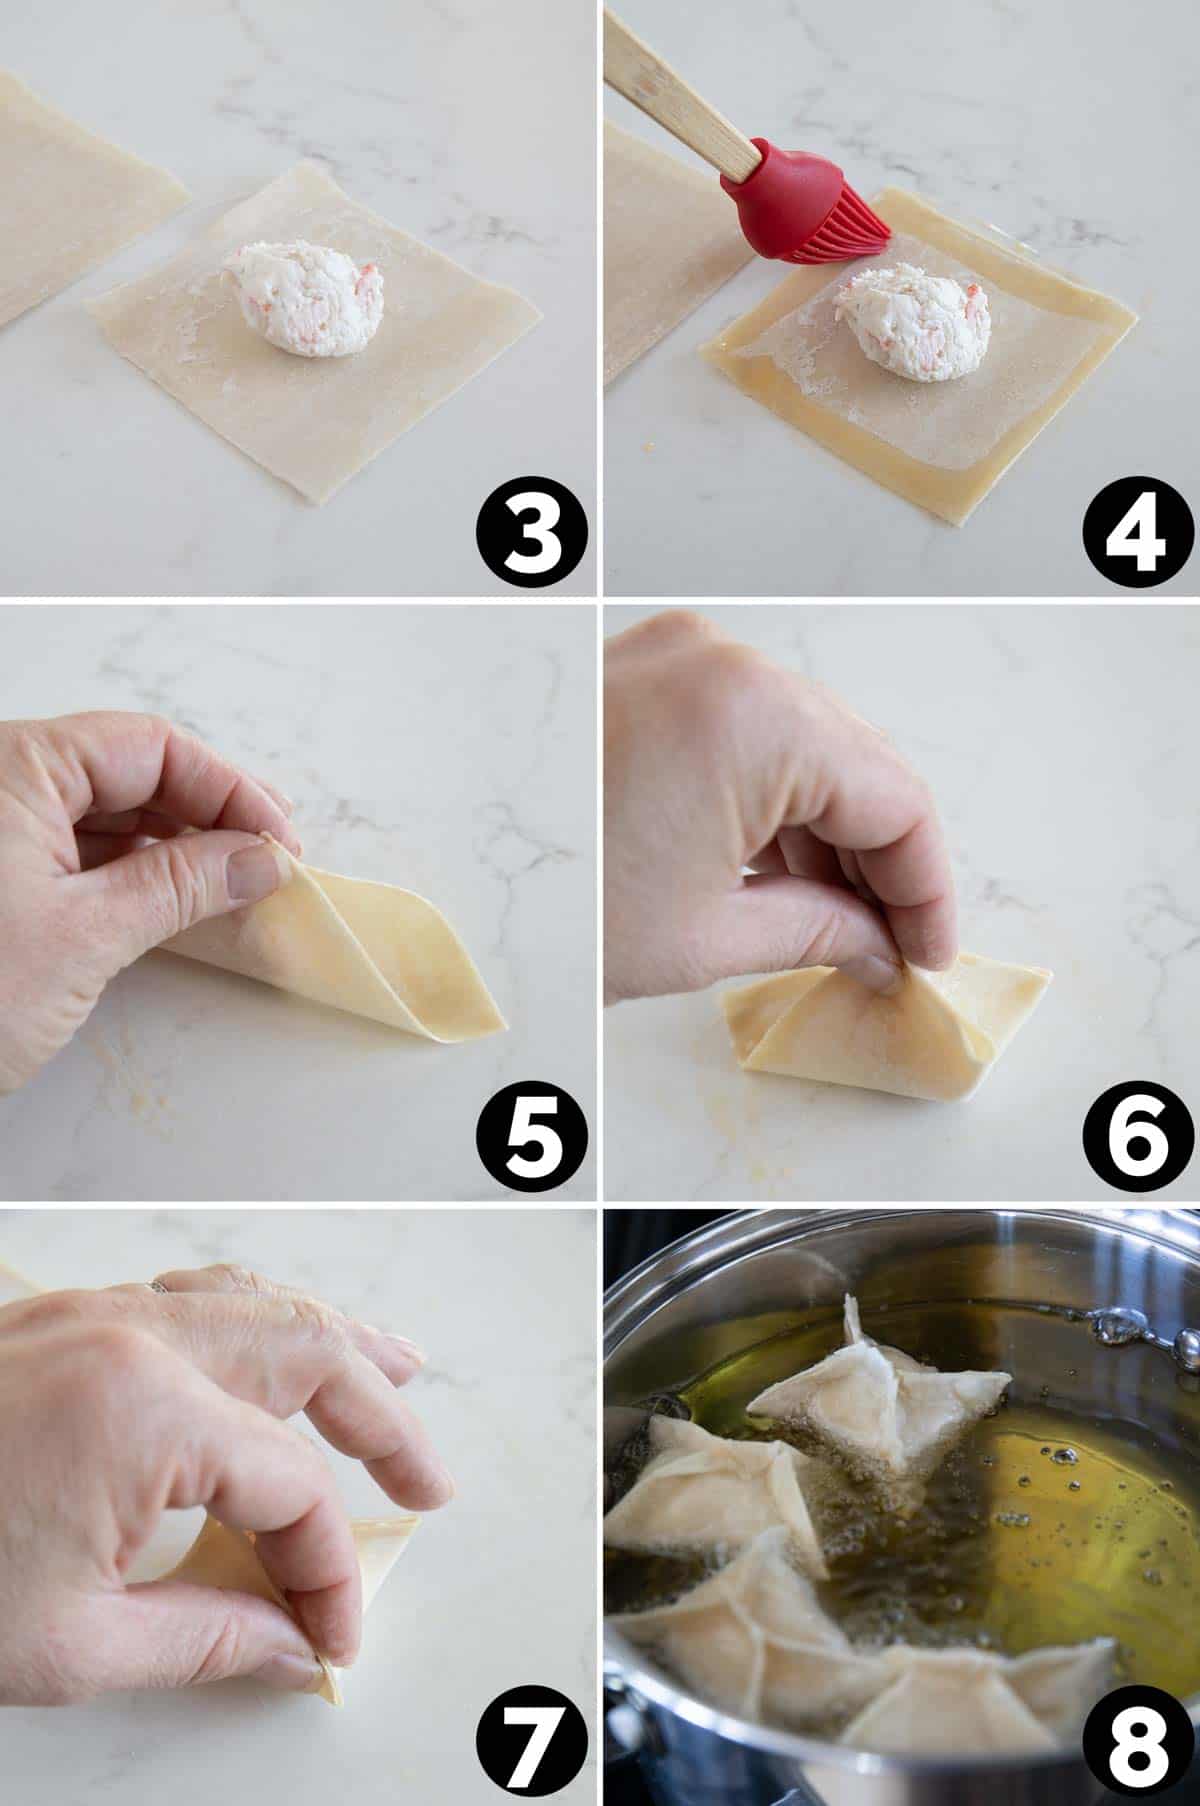 How to fold and fry crab rangoon.